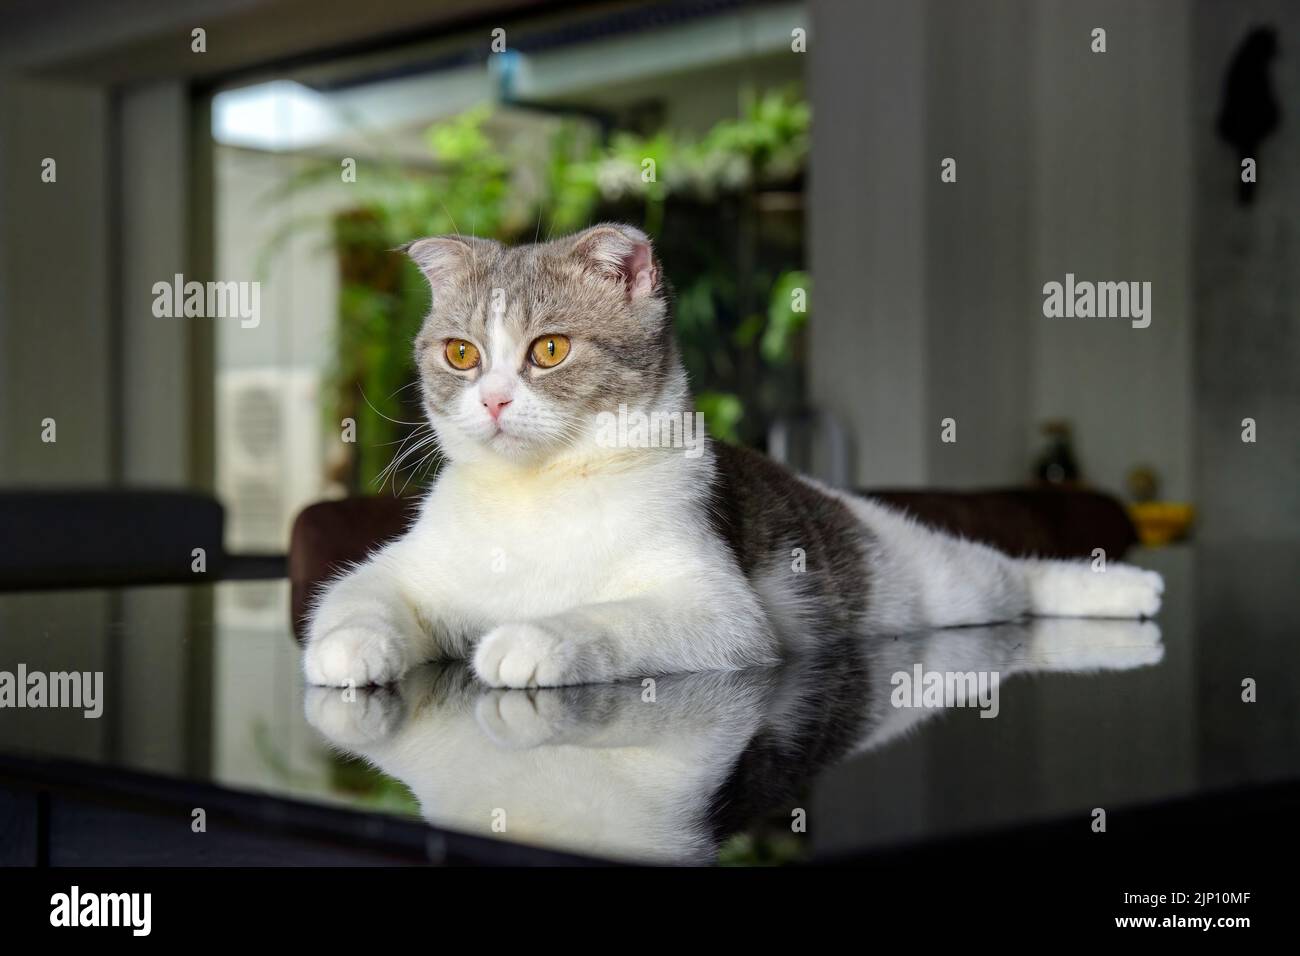 scottish fold cat White and gray stripes. Yellow eyes. Posing in a sitting position on a black table in the house, view from the side. Great pedigree Stock Photo